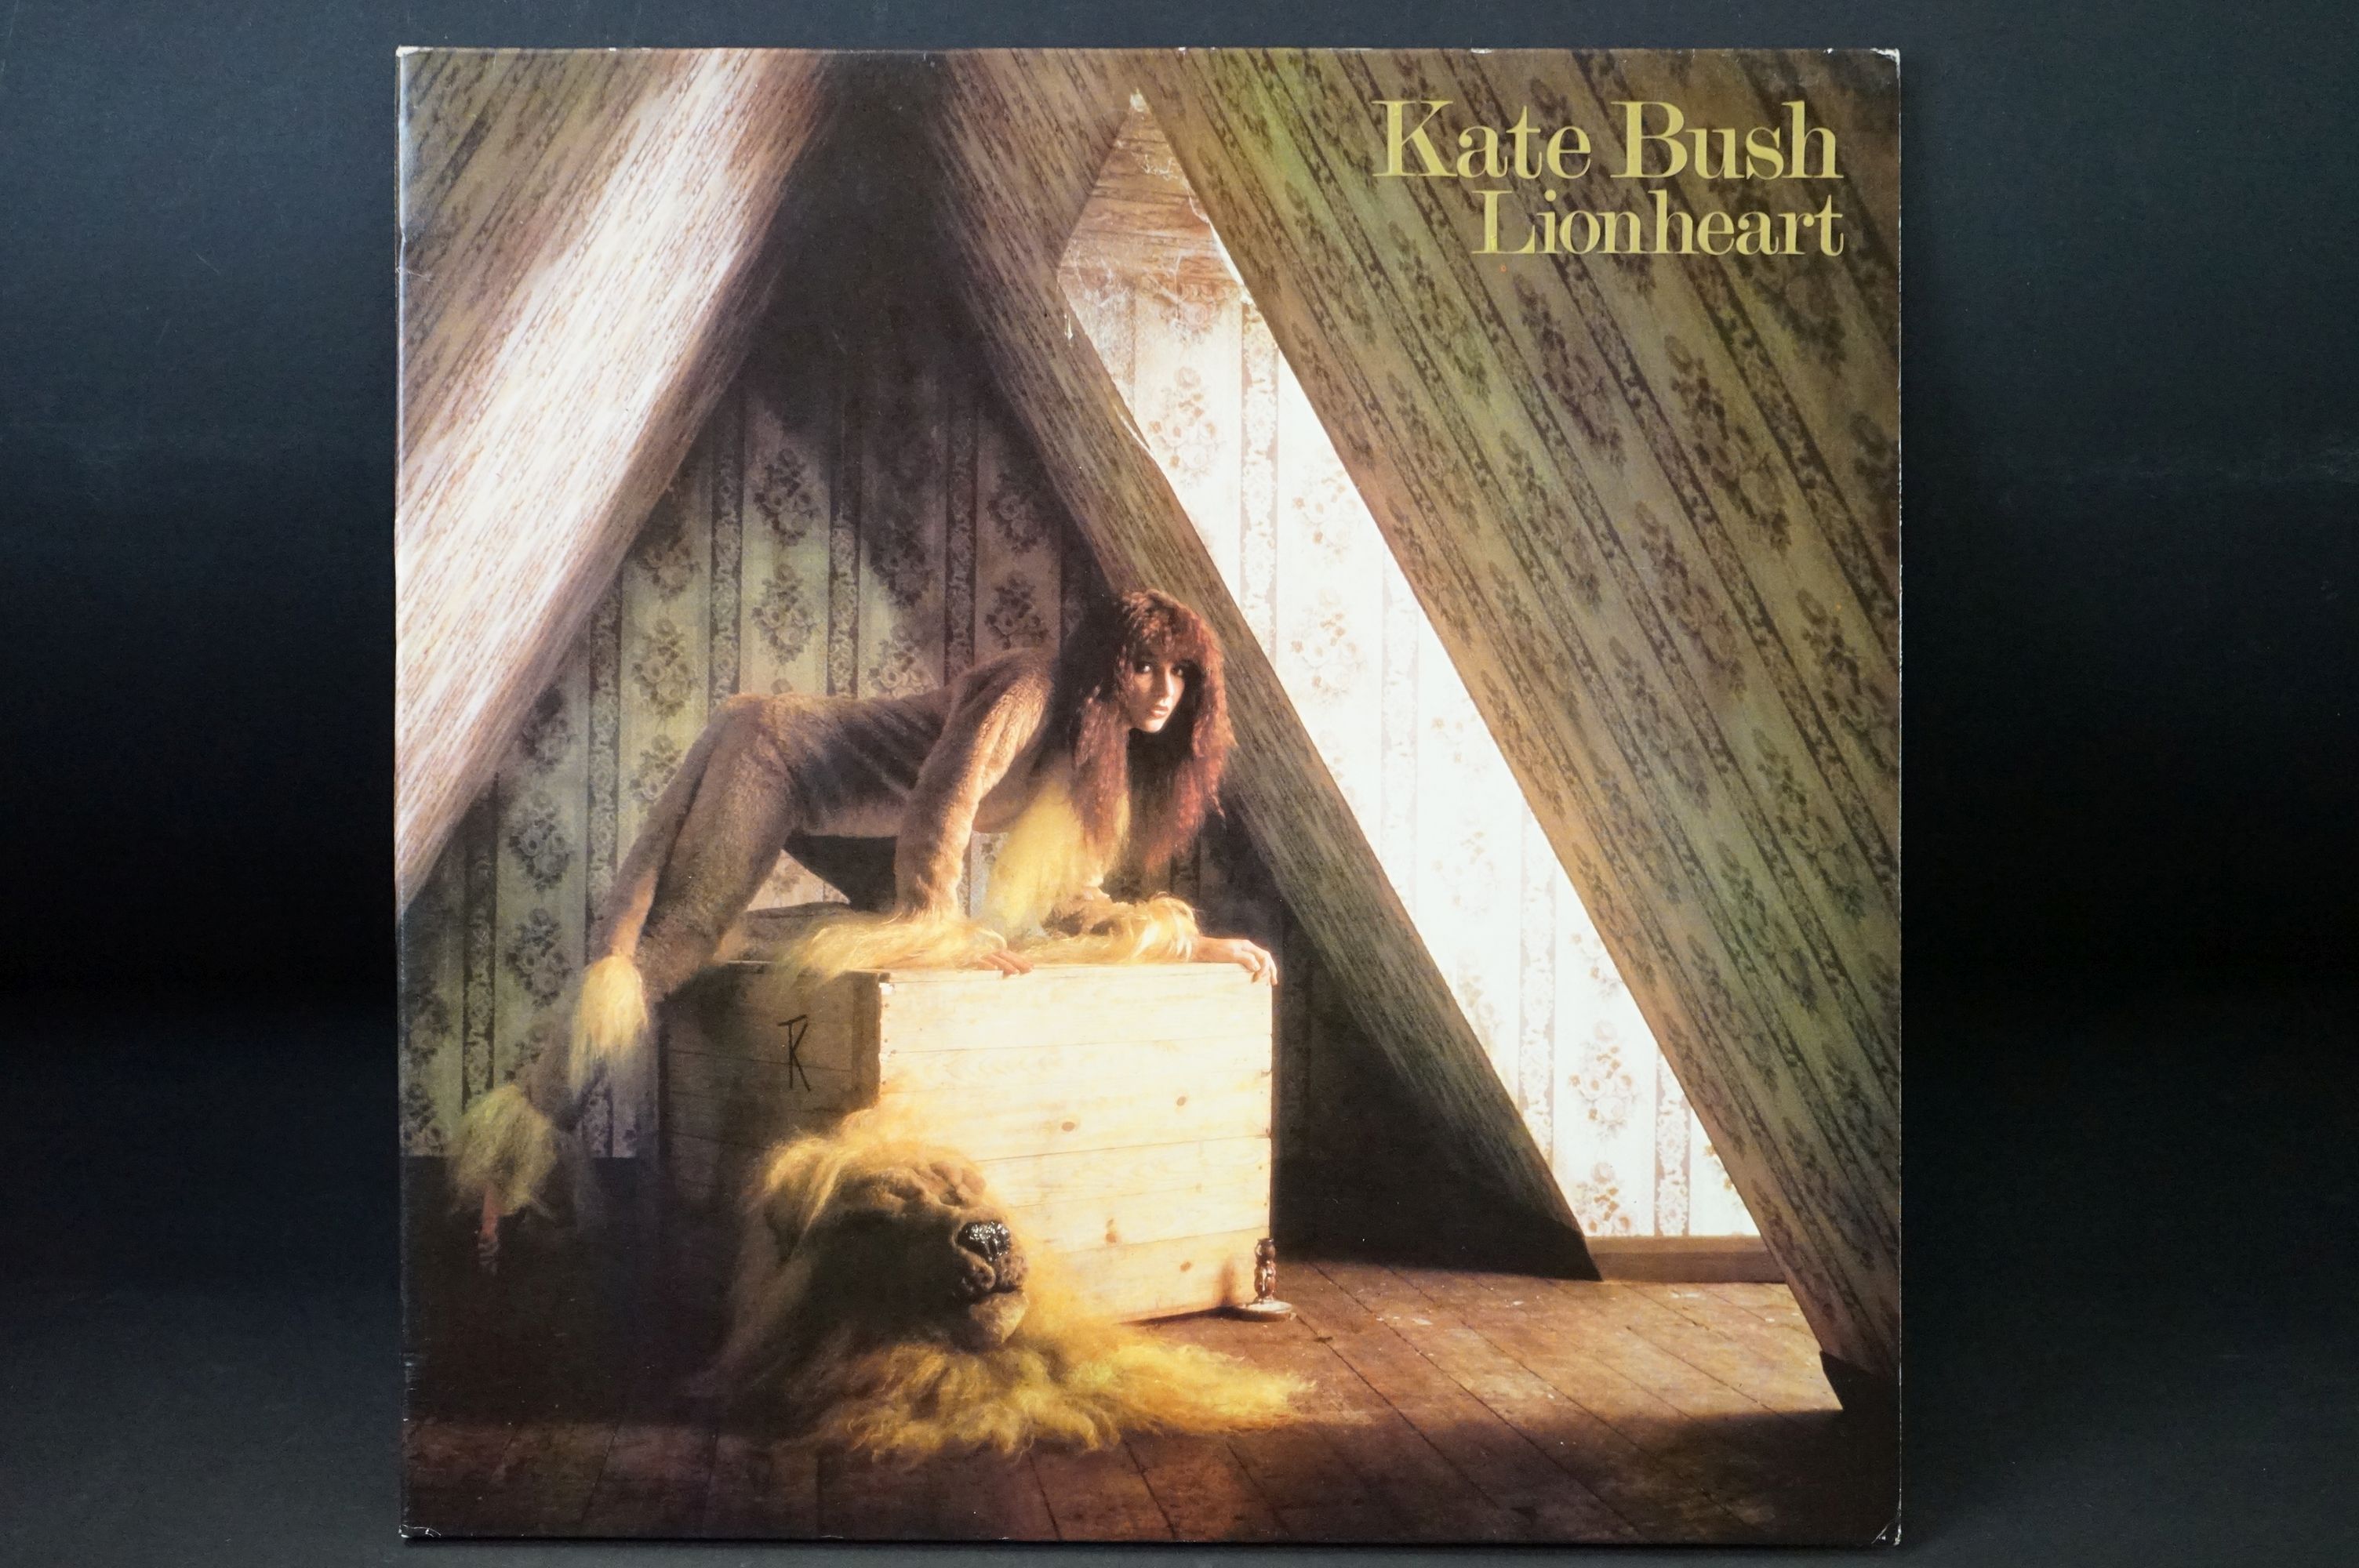 Vinyl & Autograph - Kate Bush Lionheart LP signed to rear 'For Charles lots of love Kate x' - Image 9 of 9